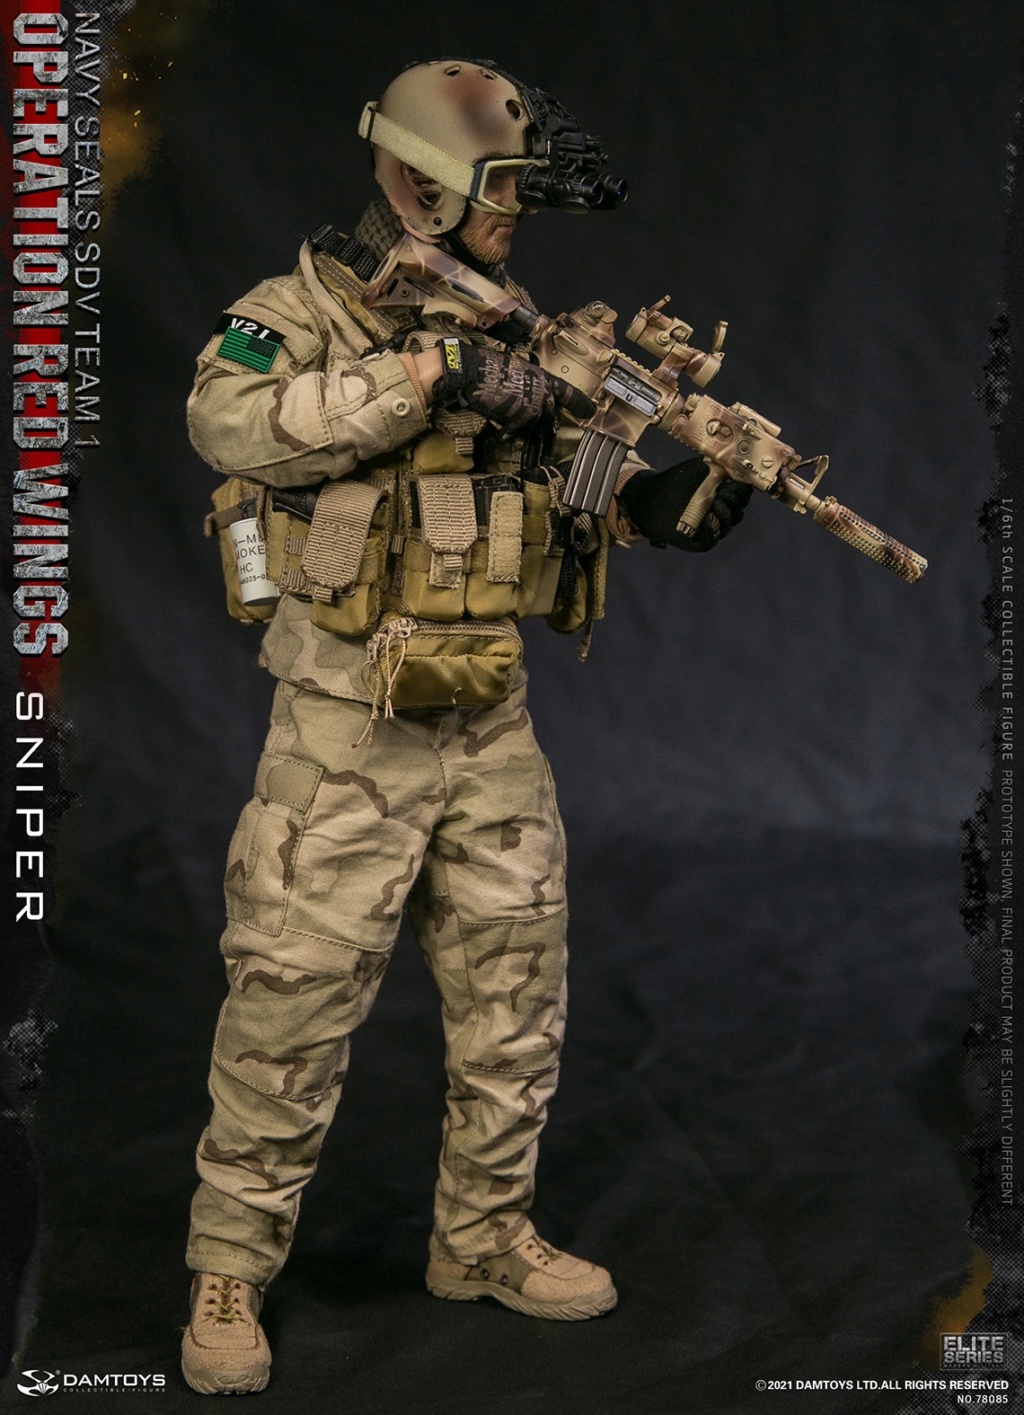 ModernMilitary - NEW PRODUCT: DAMTOYS: 1/6 Operation Red Wings-SEAL Special Forces First Transport Vehicle Brigade-Sniper #78085 10294811